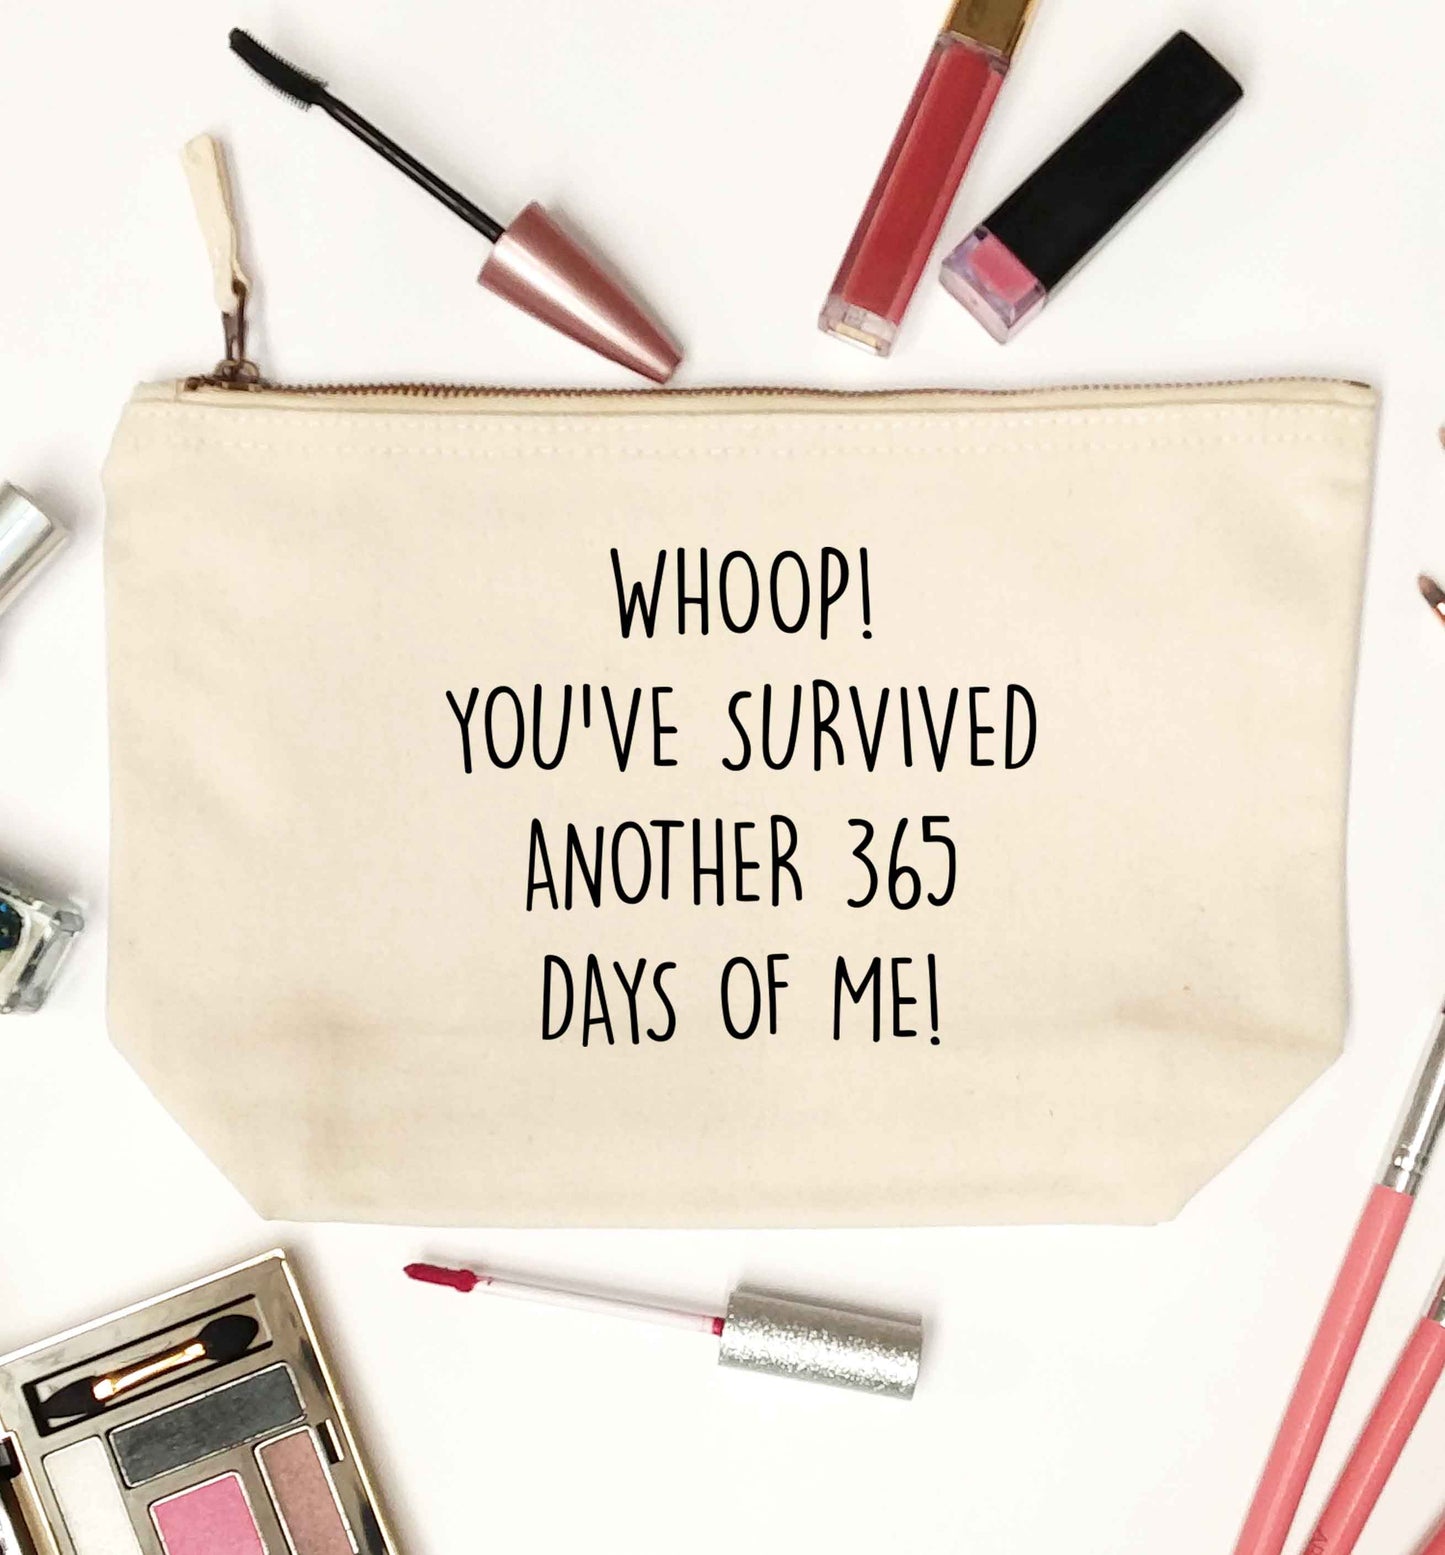 Whoop! You've survived another 365 days with me! natural makeup bag